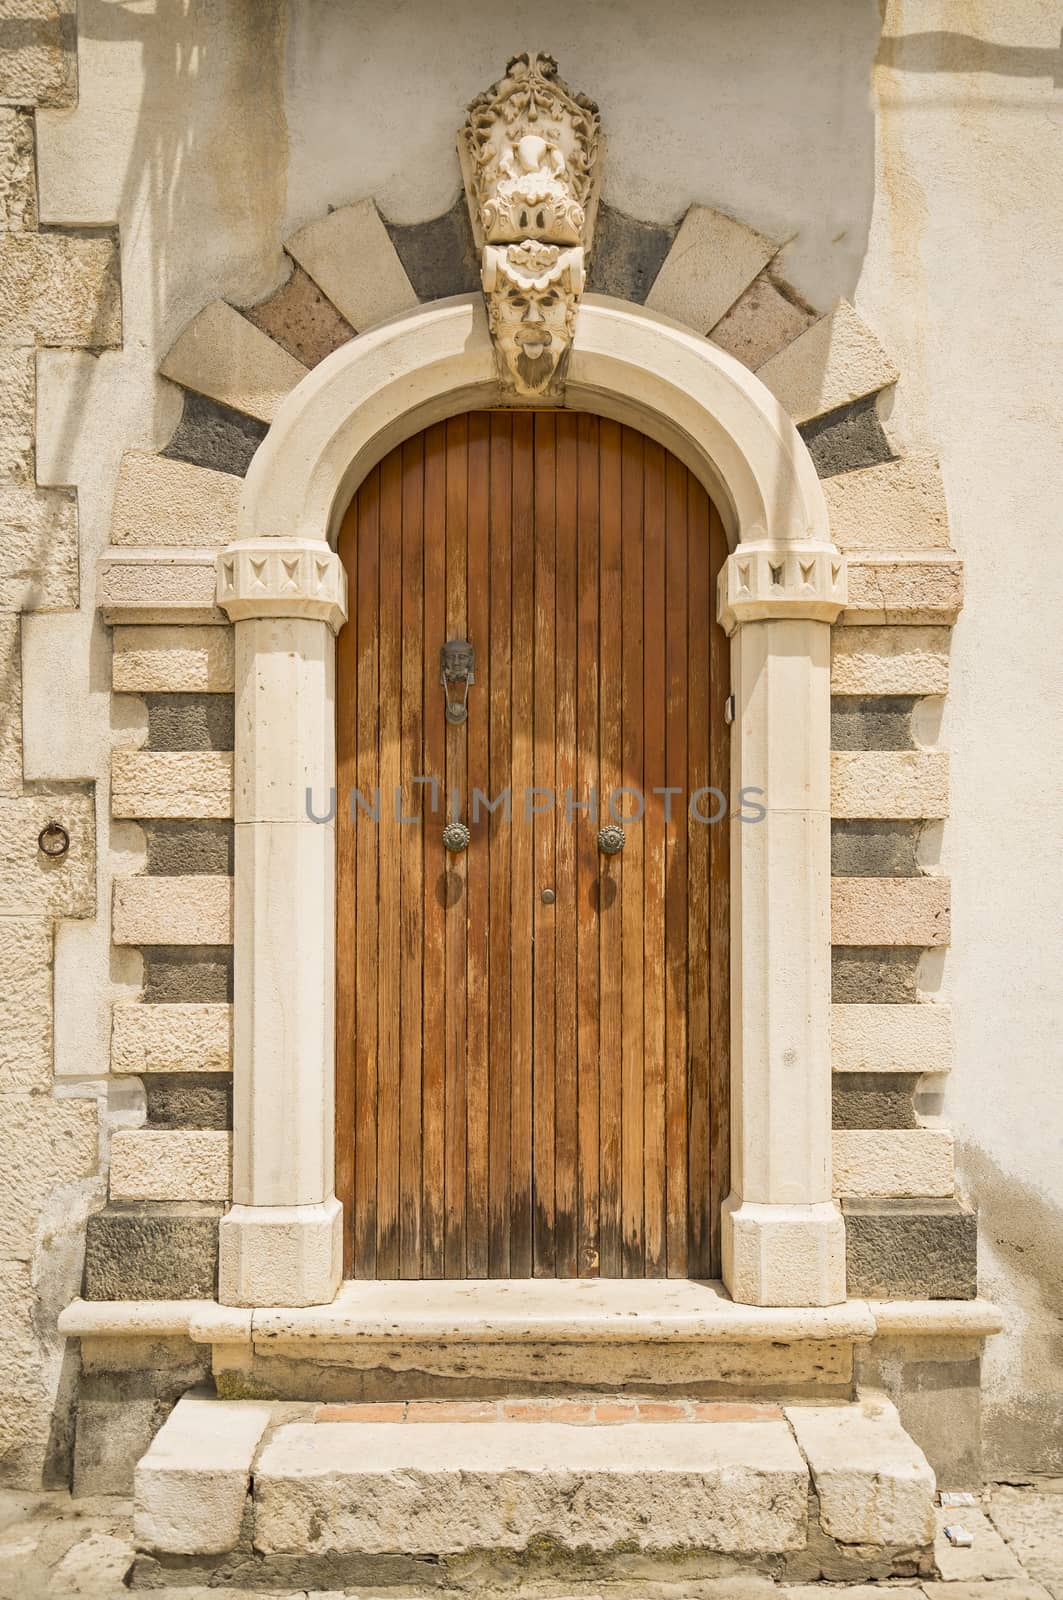 The entrance wooden door in an old Italian house